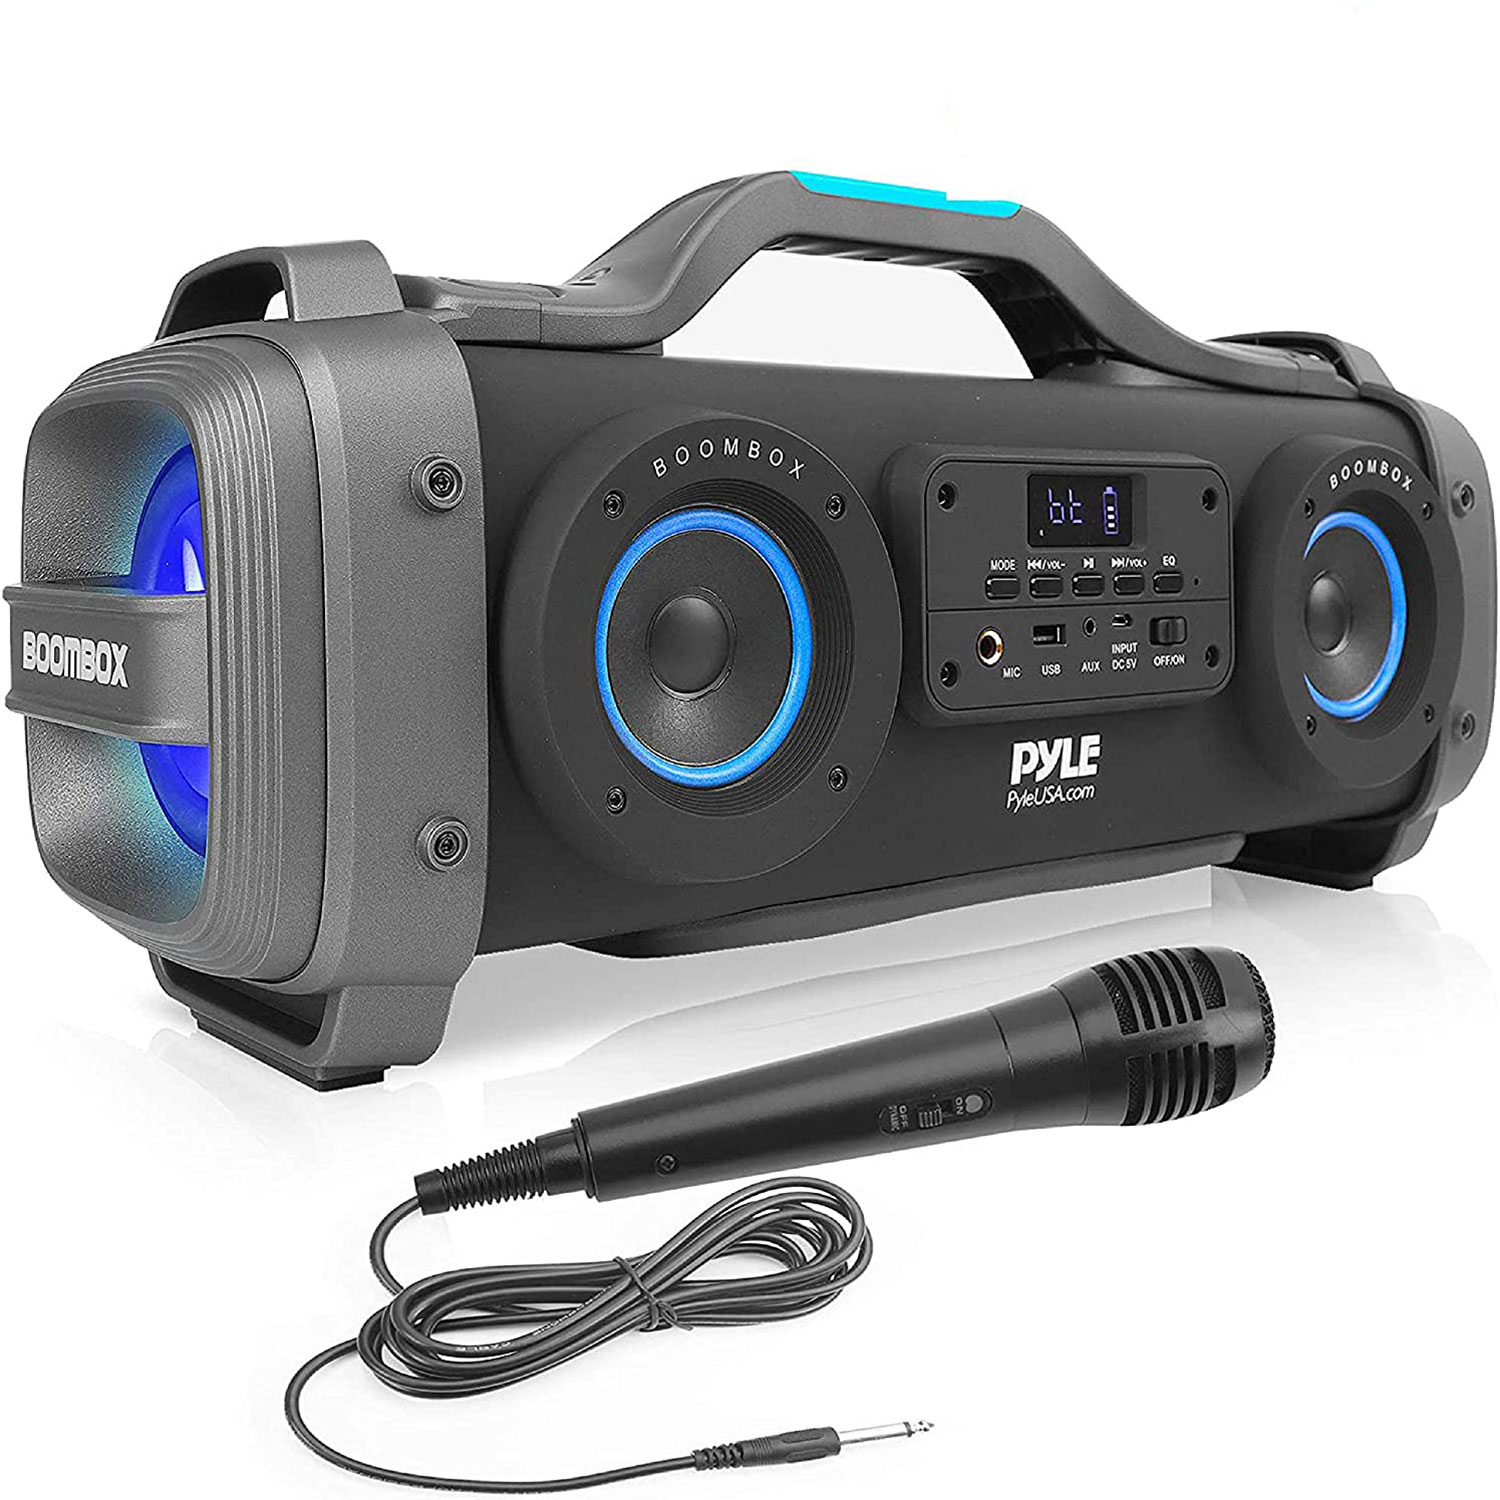 Pyle PBMSPG148 - BoomBox Karaoke Speaker System - & Portable Stereo Radio Speaker with Wired Handheld Micro, Flashing DJ Party Lights, FM Radio - image 1 of 10